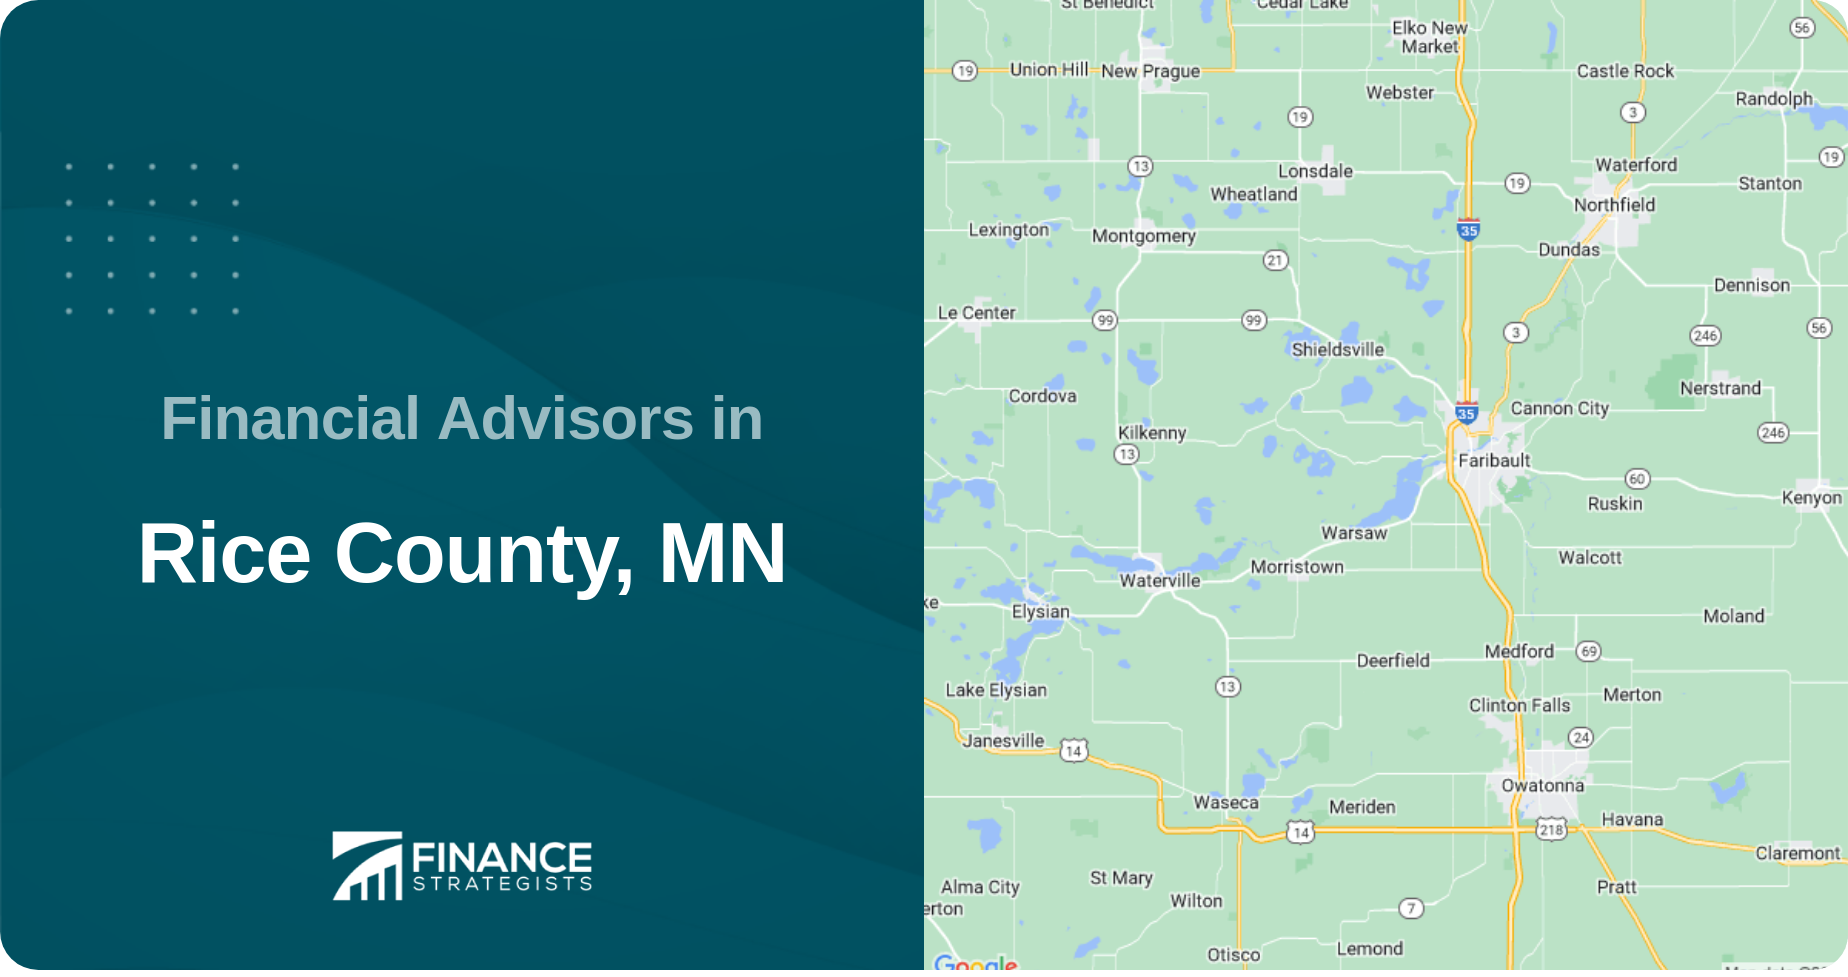 Financial Advisors in Rice County, MN